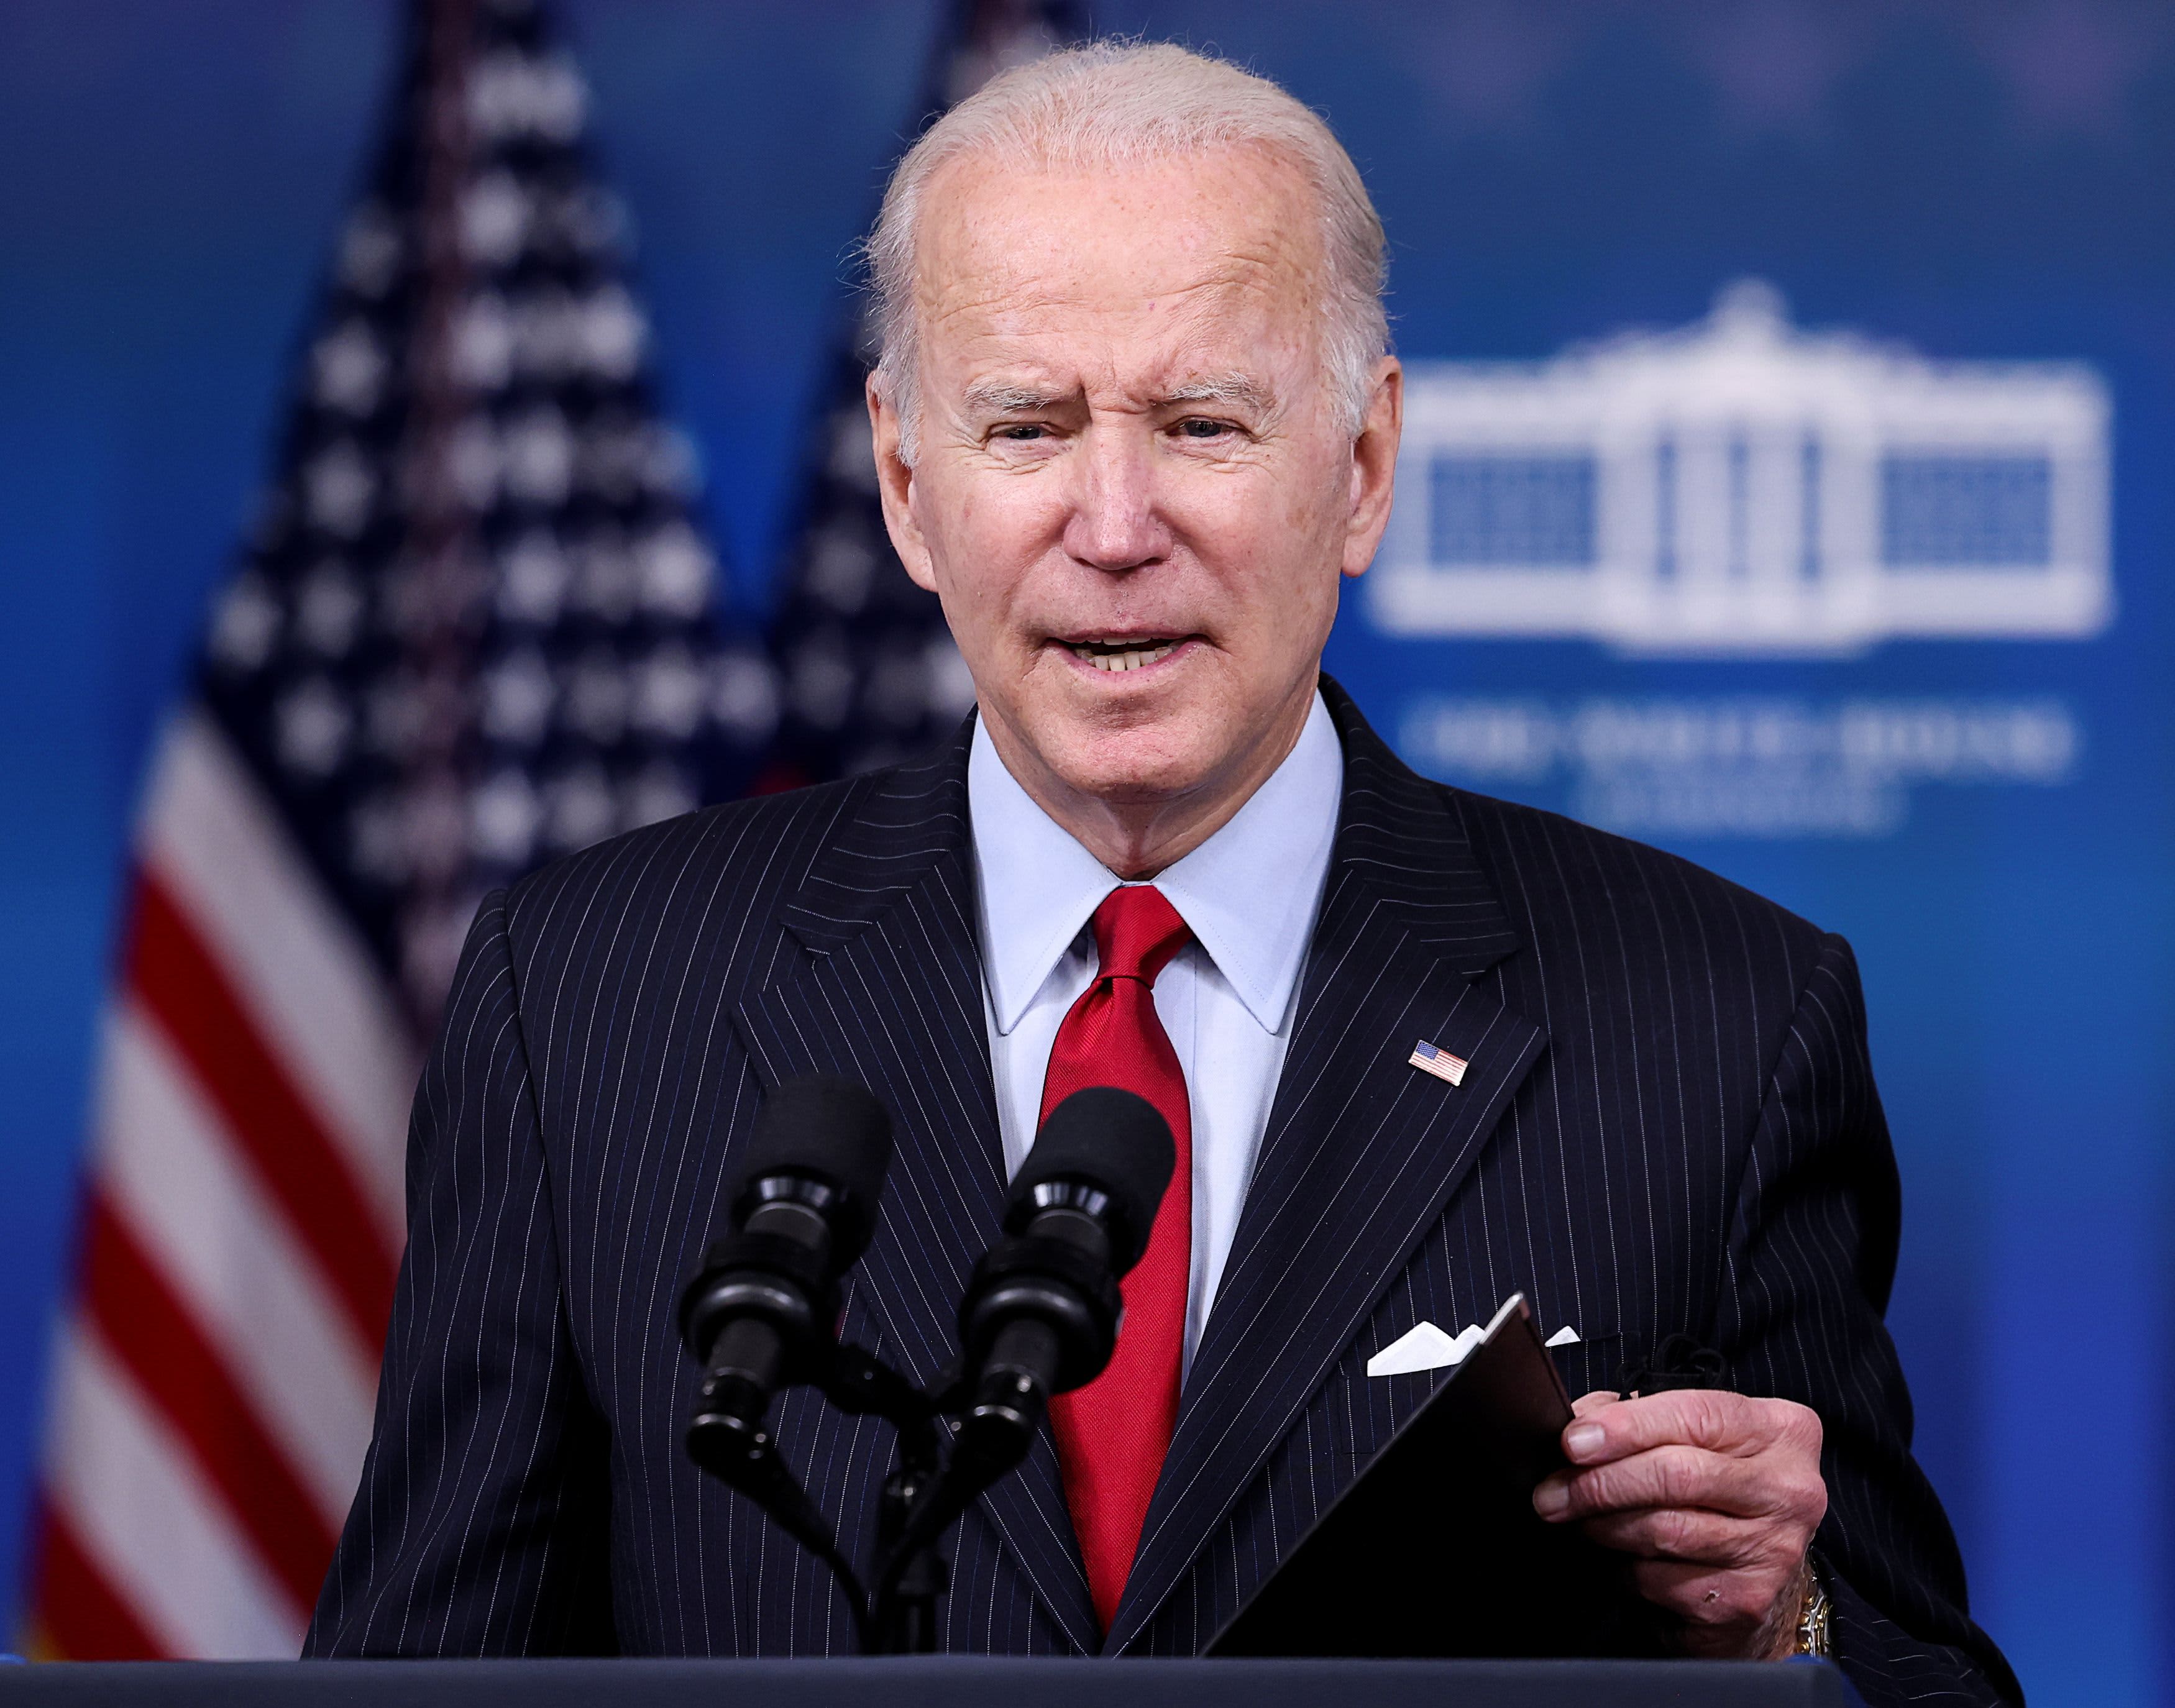 Biden to host CEOs to discuss holiday shopping supply chain issues, inflation